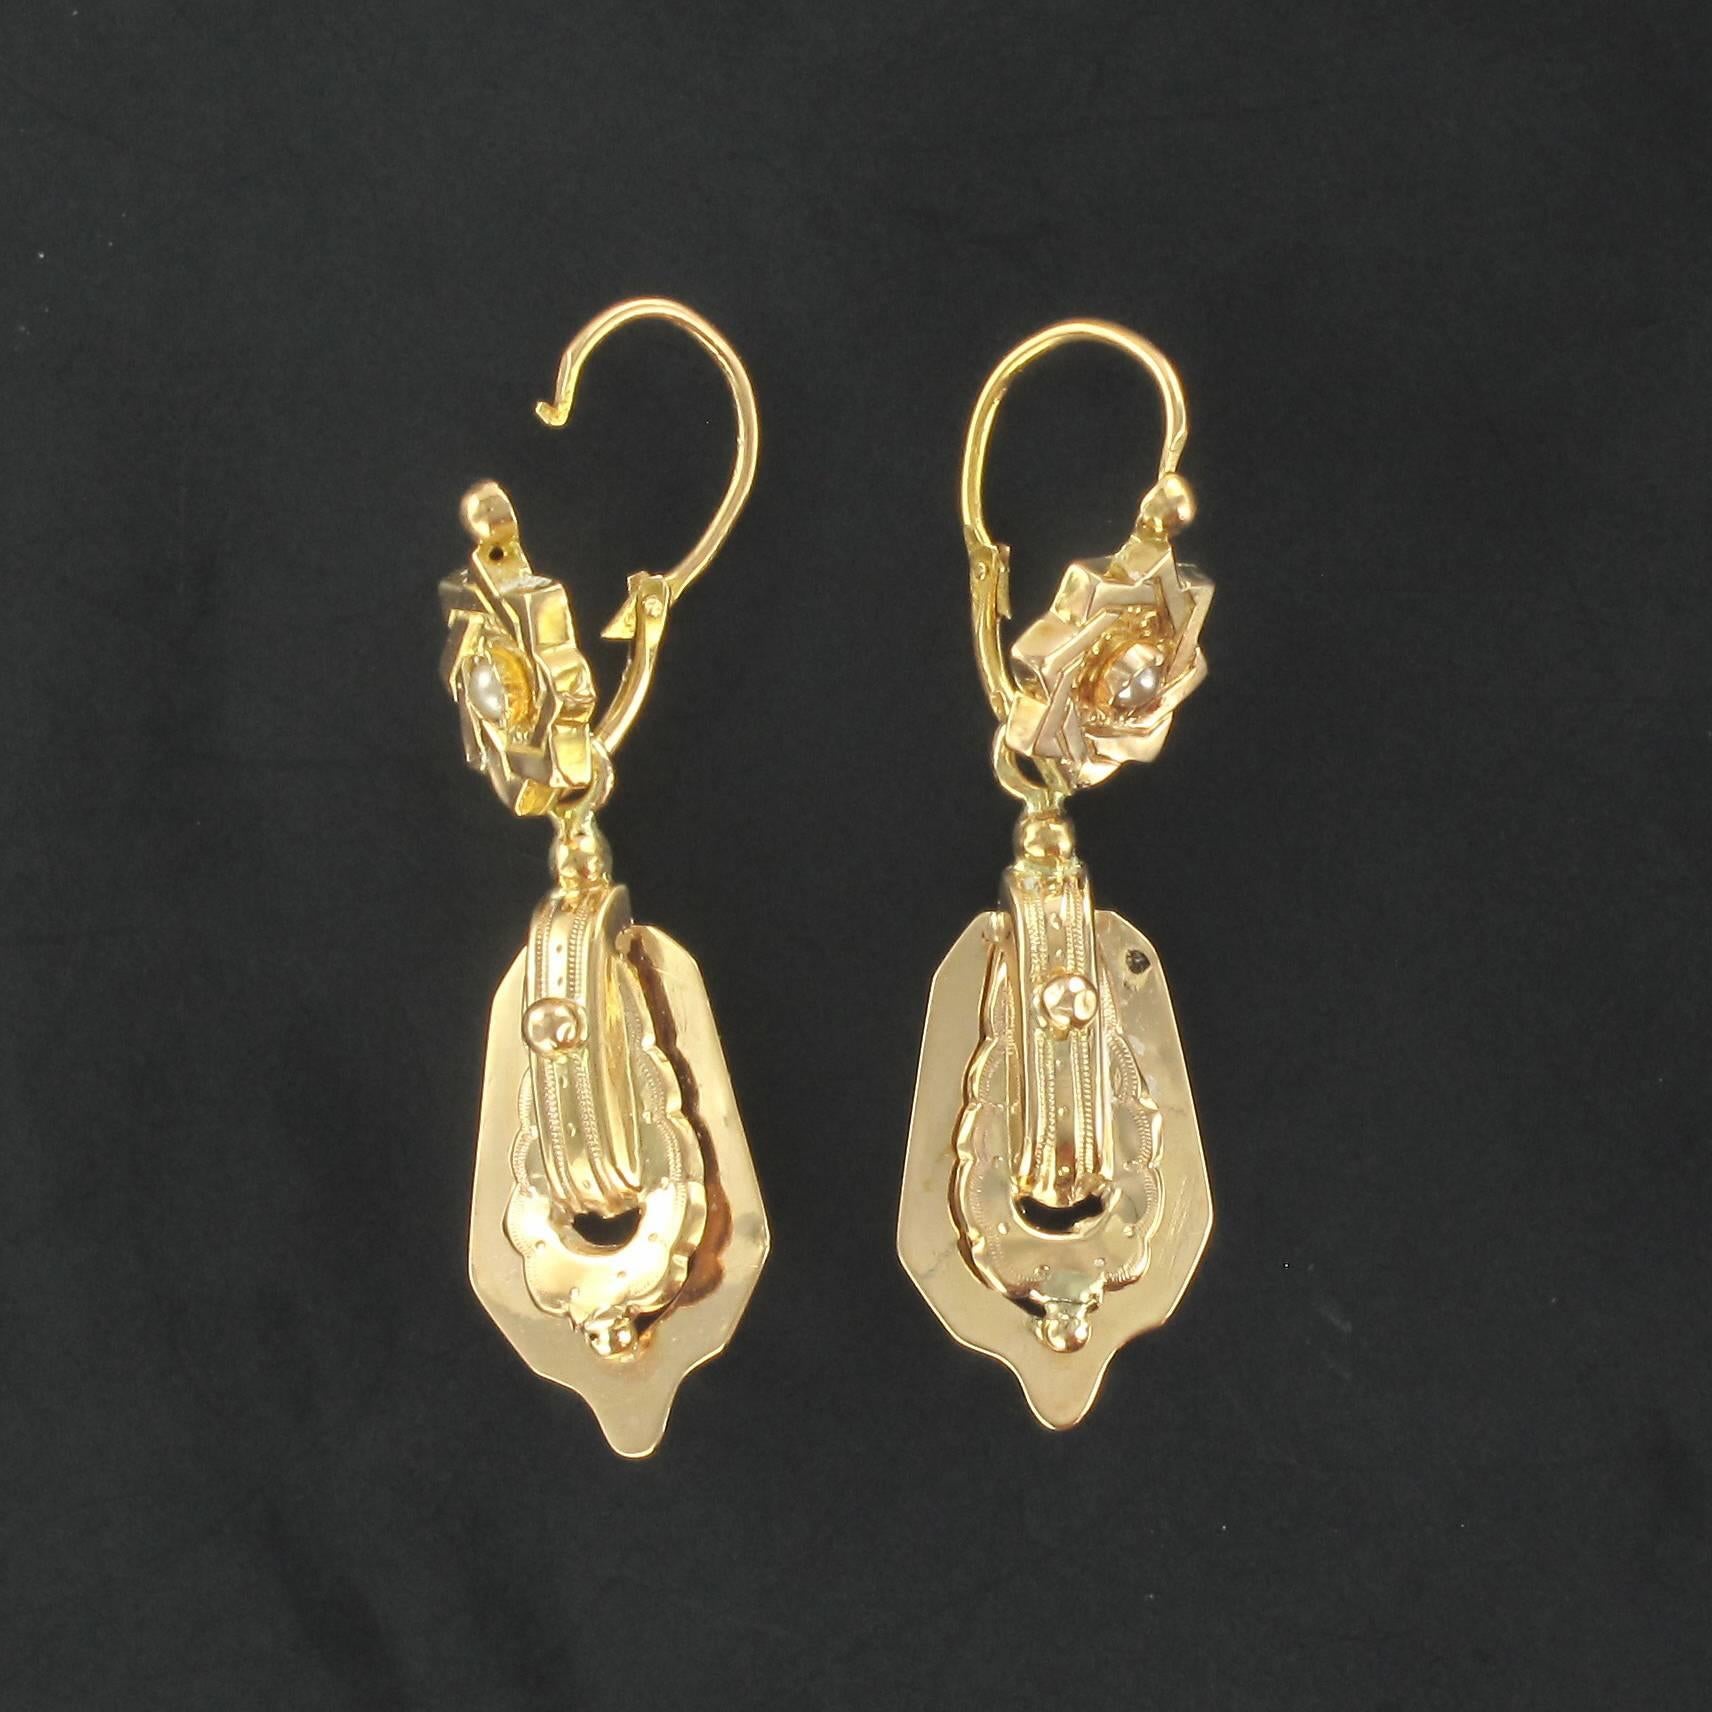 For pierced ears.

Pair of earrings in 18 carat rose gold, eagle head hallmark.

Each rose gold earring is composed of a star design set with a central fine pearl. A suspended rose gold openwork motif of finely chiselled gold with a claw set